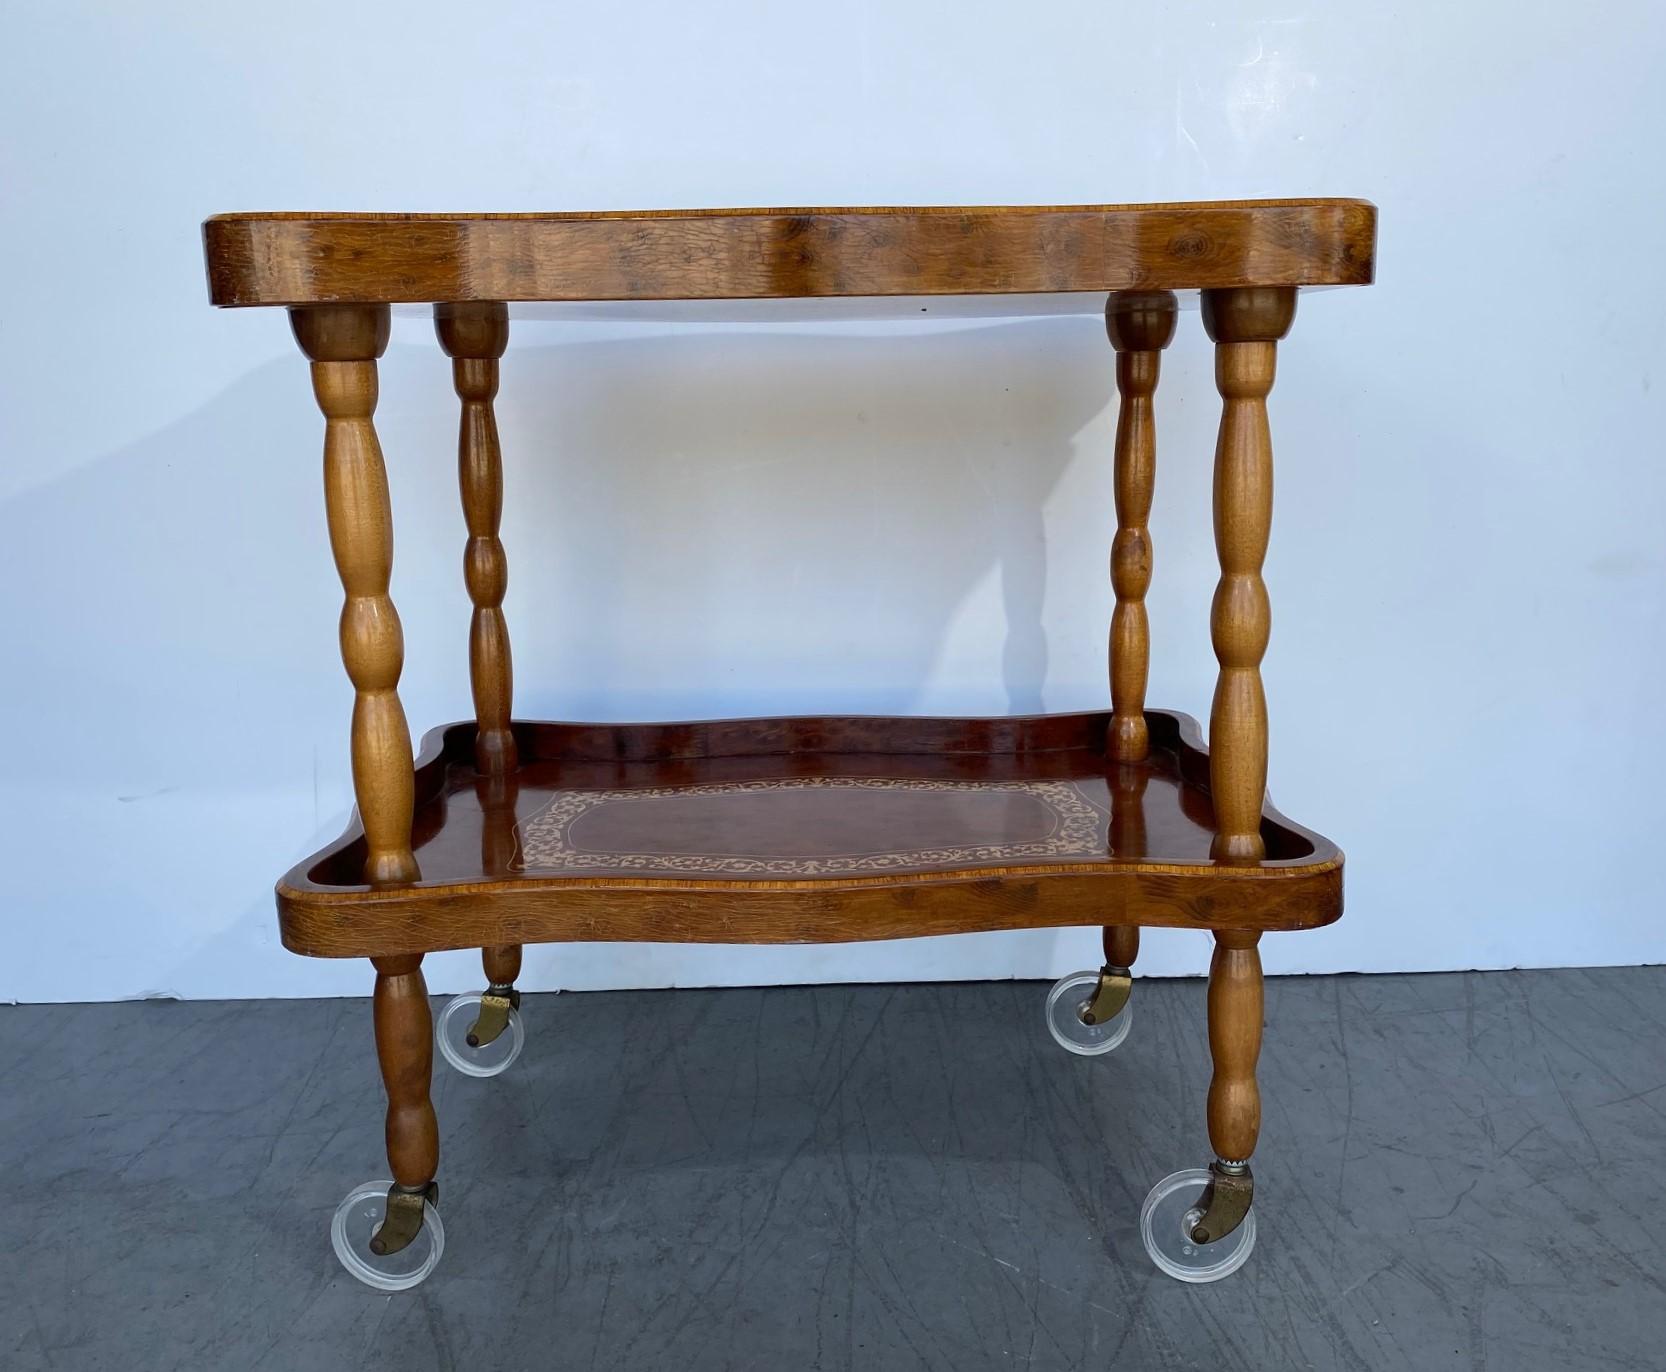 An Italian marquetry bar cart with a removable tray.